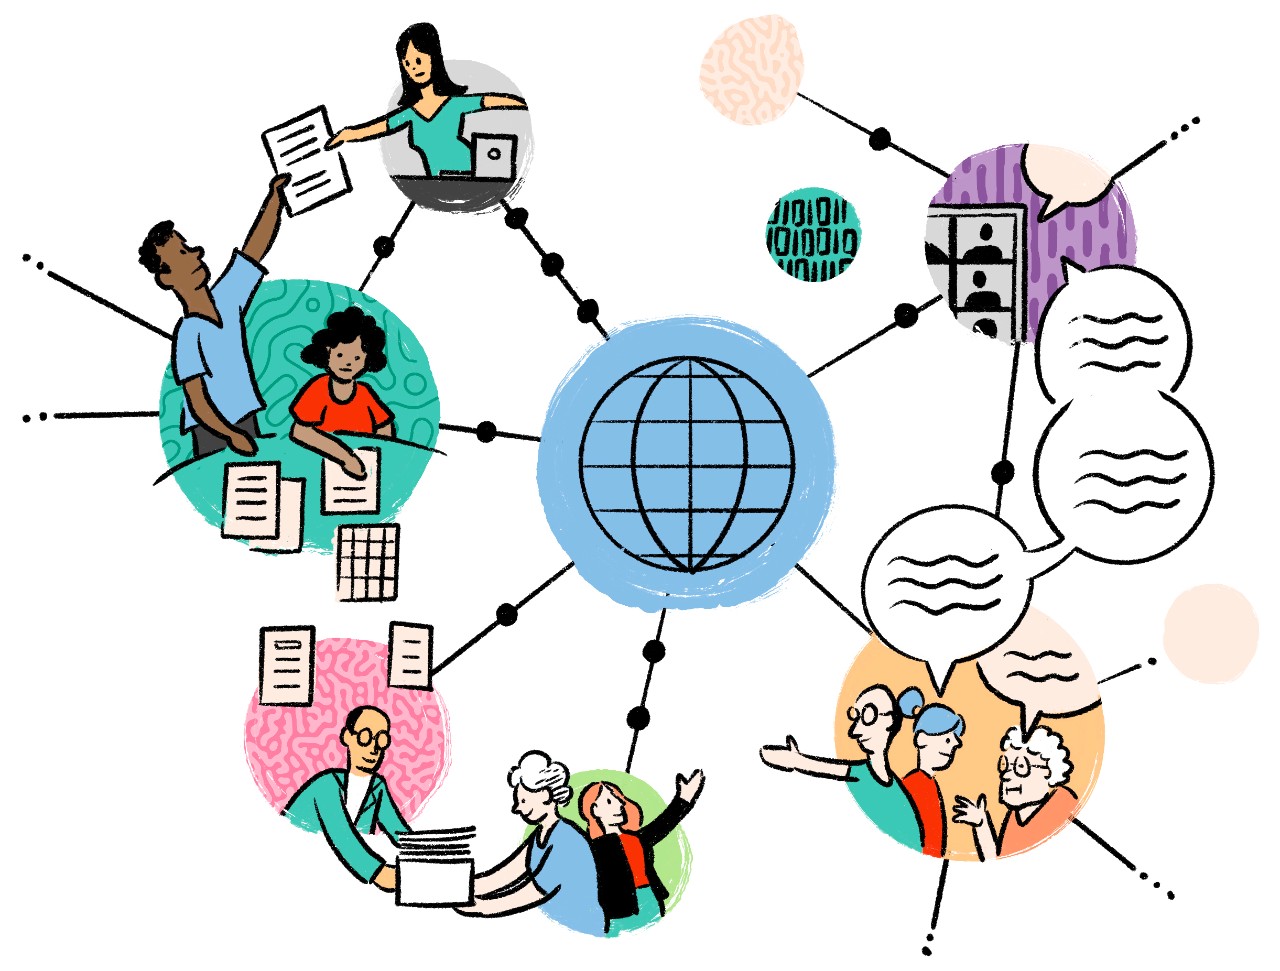 Surrounding a line drawing of a globe are people working together depicted in interlinked circles, documents are passed between the circles